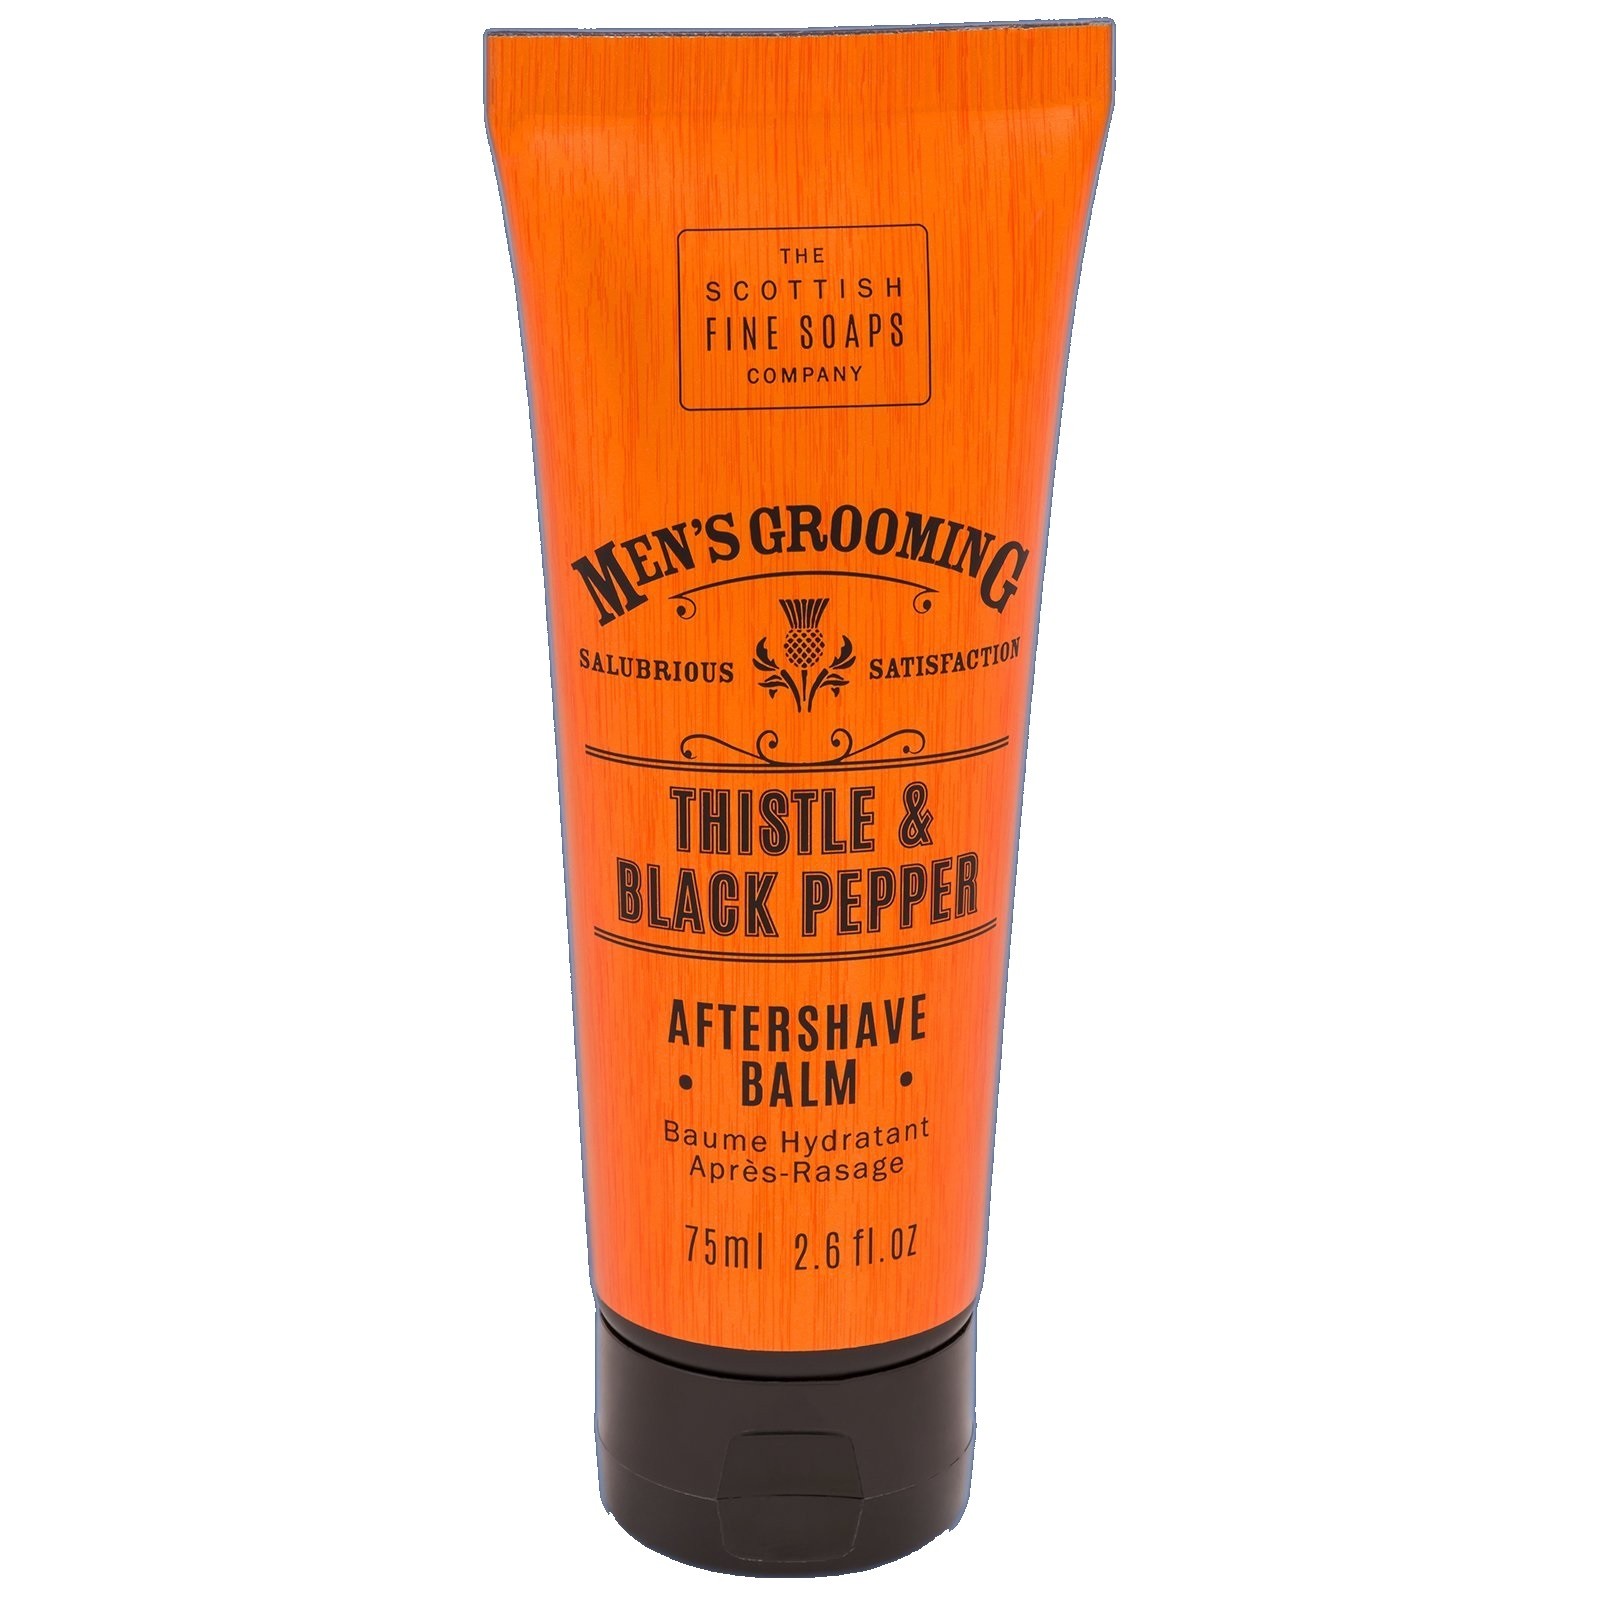 Thistle & Black Pepper Aftershave Balm - 75ml